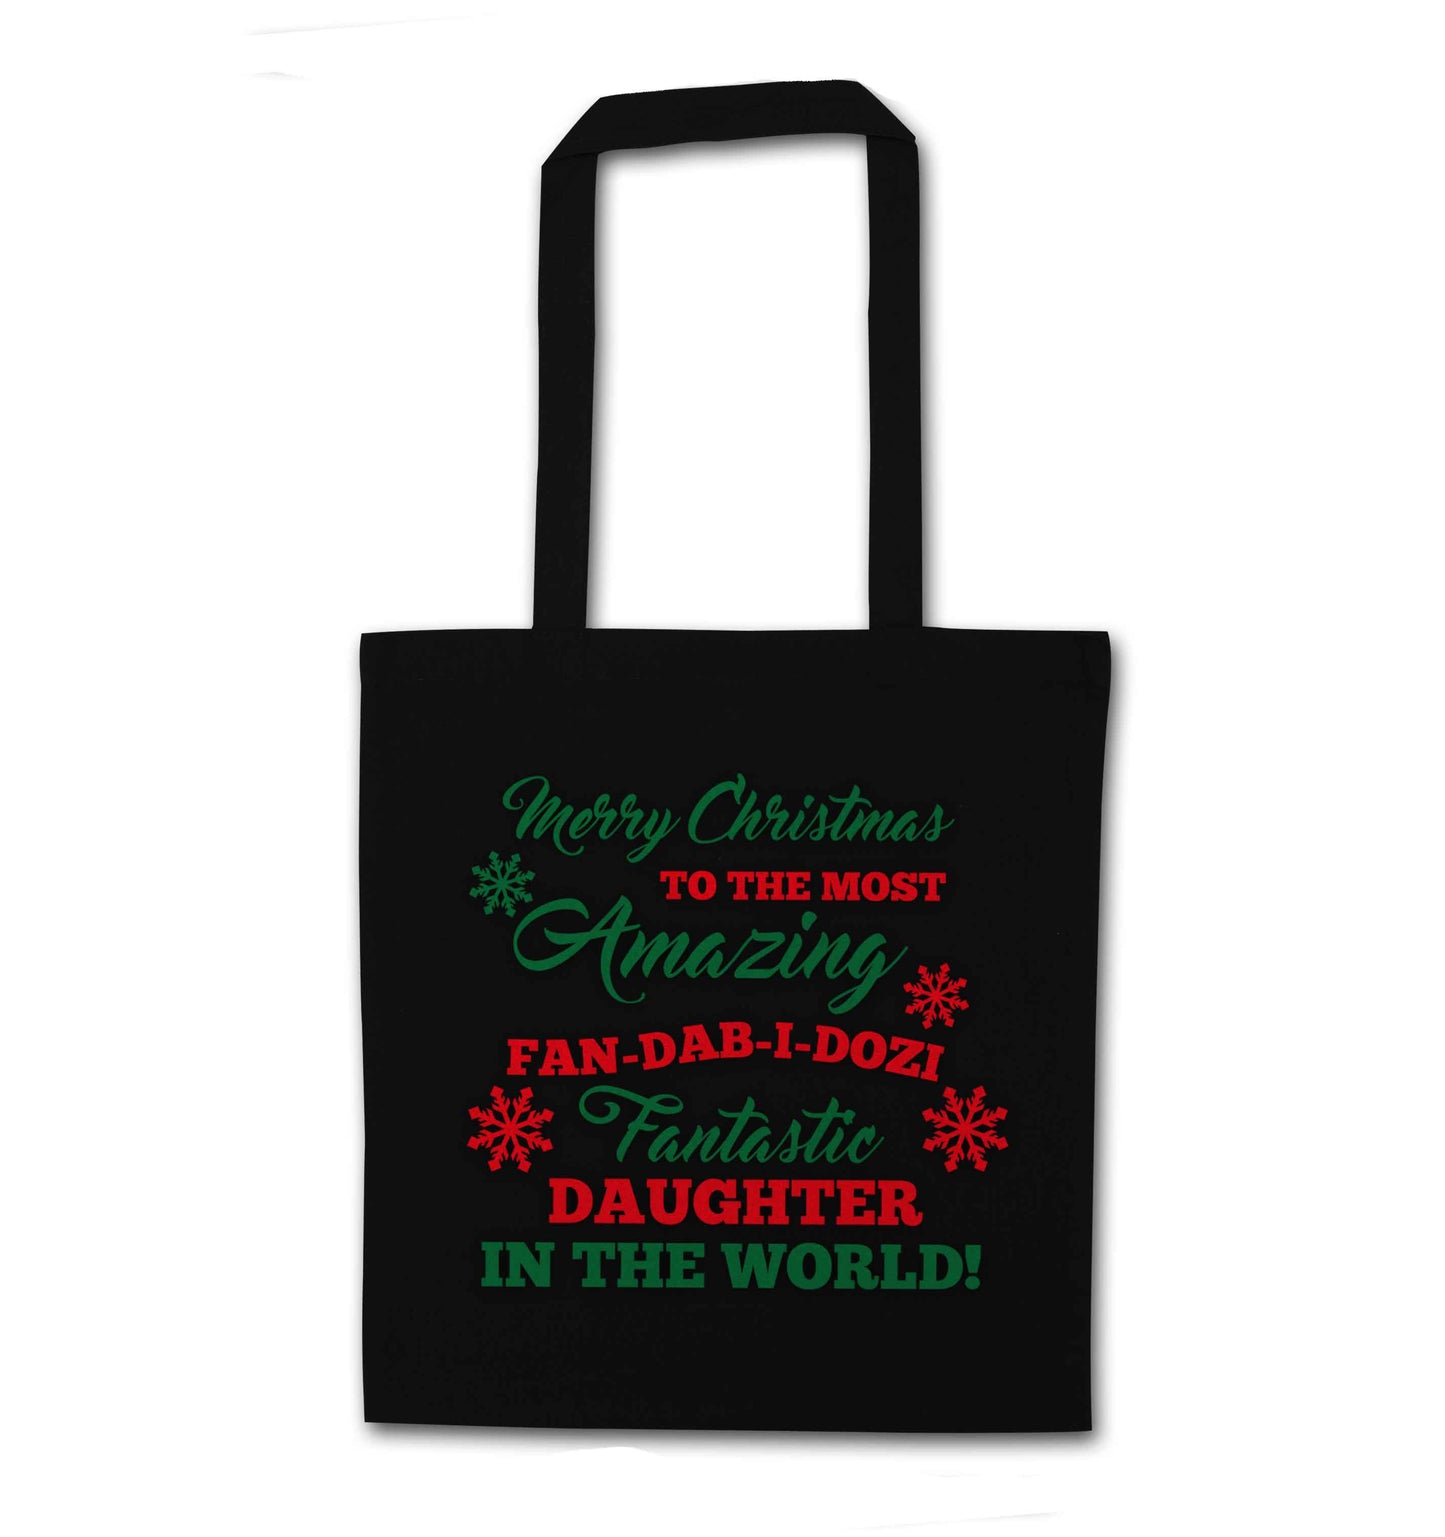 Merry Christmas to the most amazing fan-dab-i-dozi fantasic Daughter in the world black tote bag